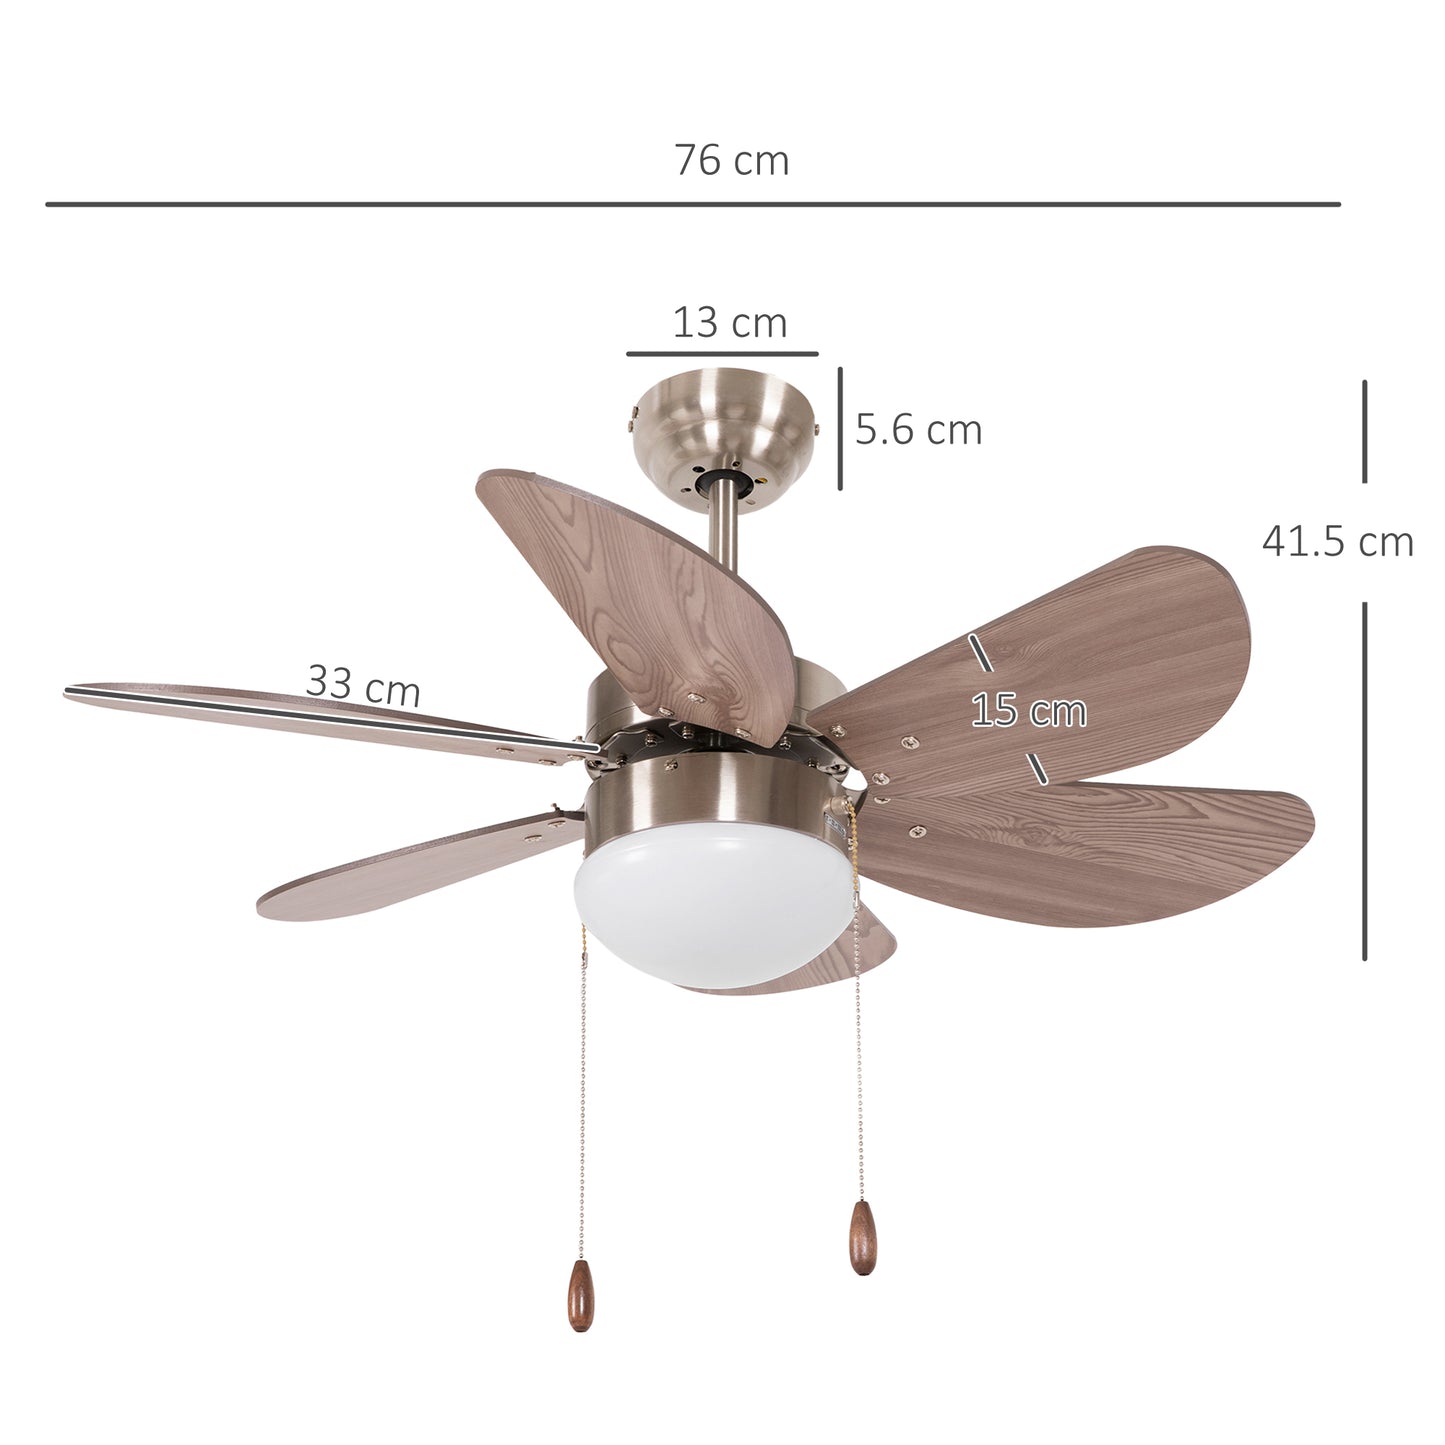 HOMCOM Ceiling Fan with LED Light, Flush Mount Ceiling Fan Lights with 6 Reversible Blades, Pull-chain Switch, Walnut Brown